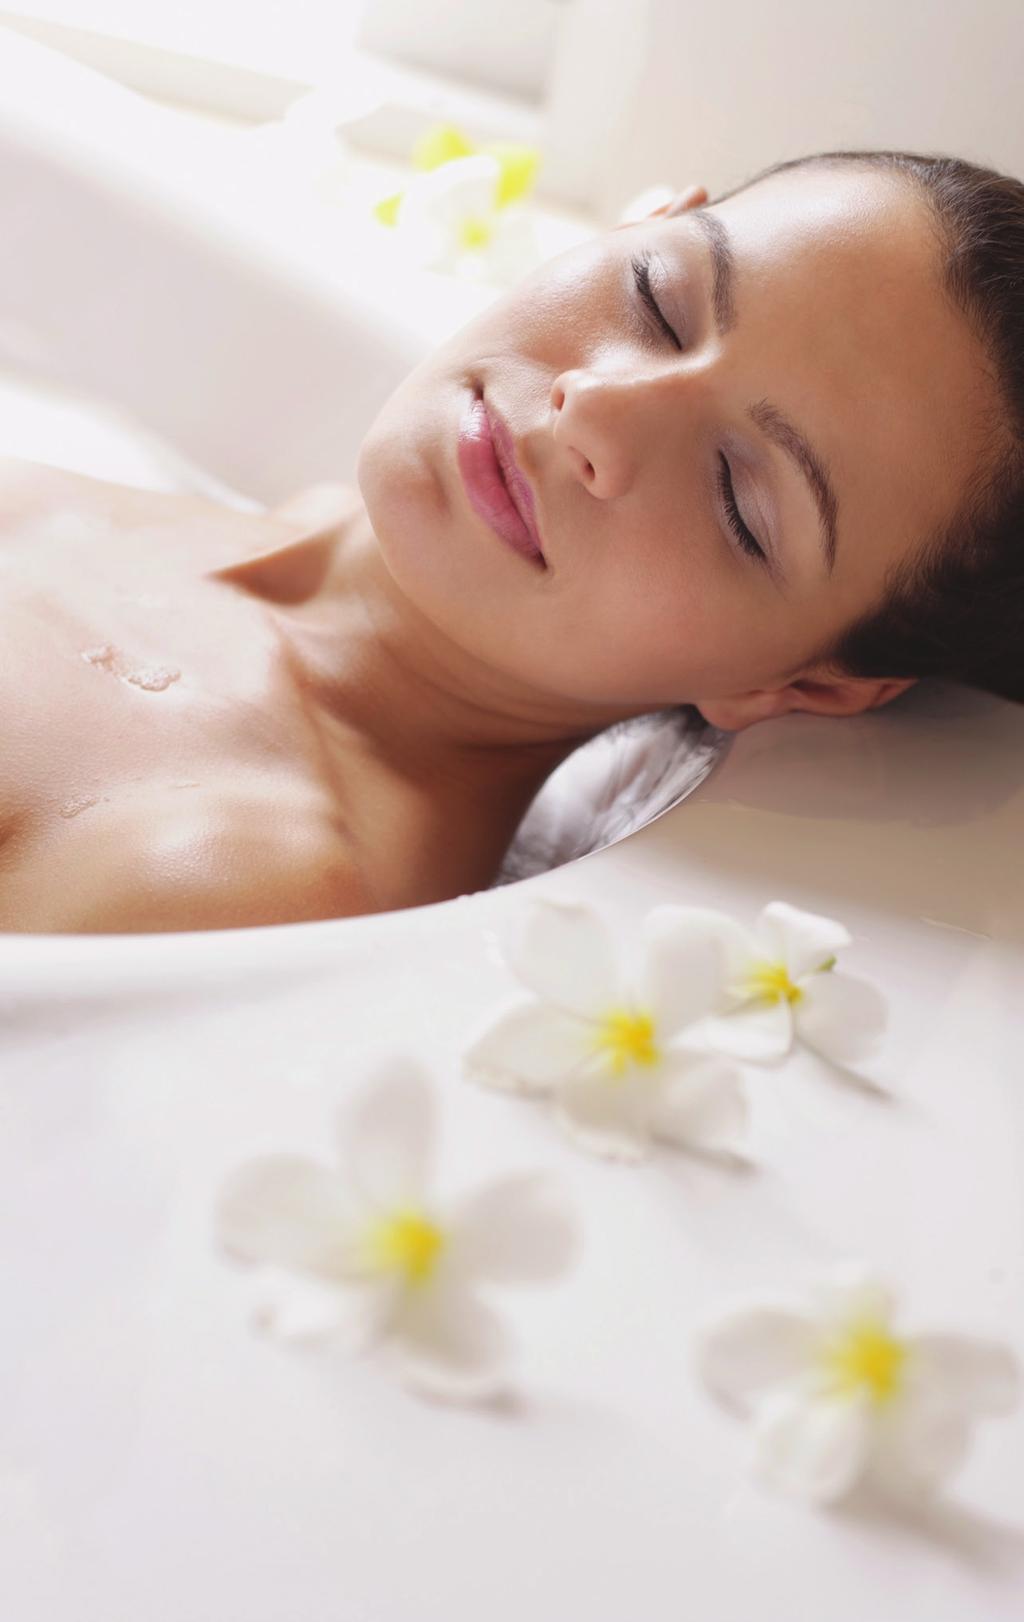 Unwind You Deserve it Treatments and services Escape the everyday with a well-deserved session of relaxation and tension release.